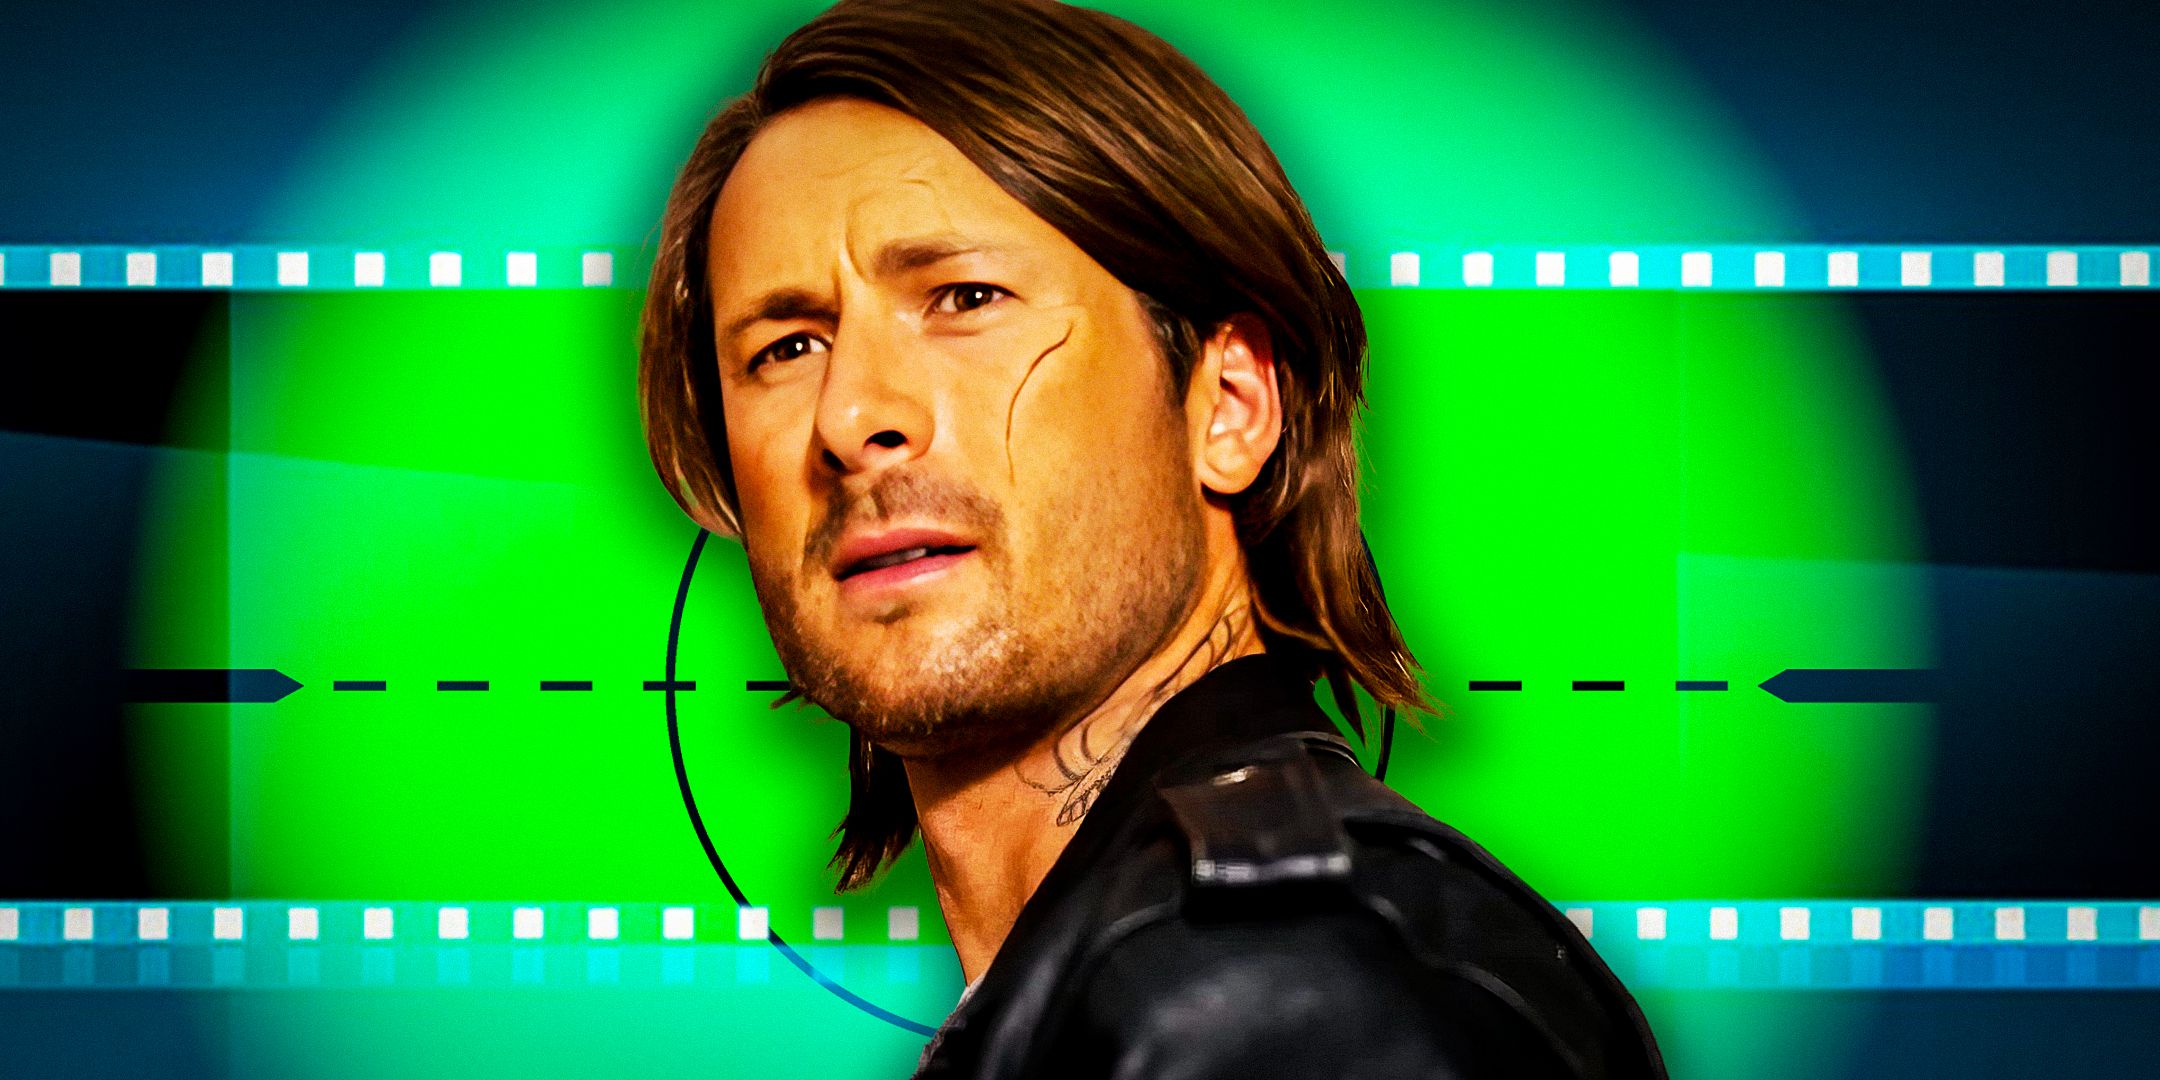 Glen Powell as Gary's scarred alias in Hit Man with a green sniper-like background